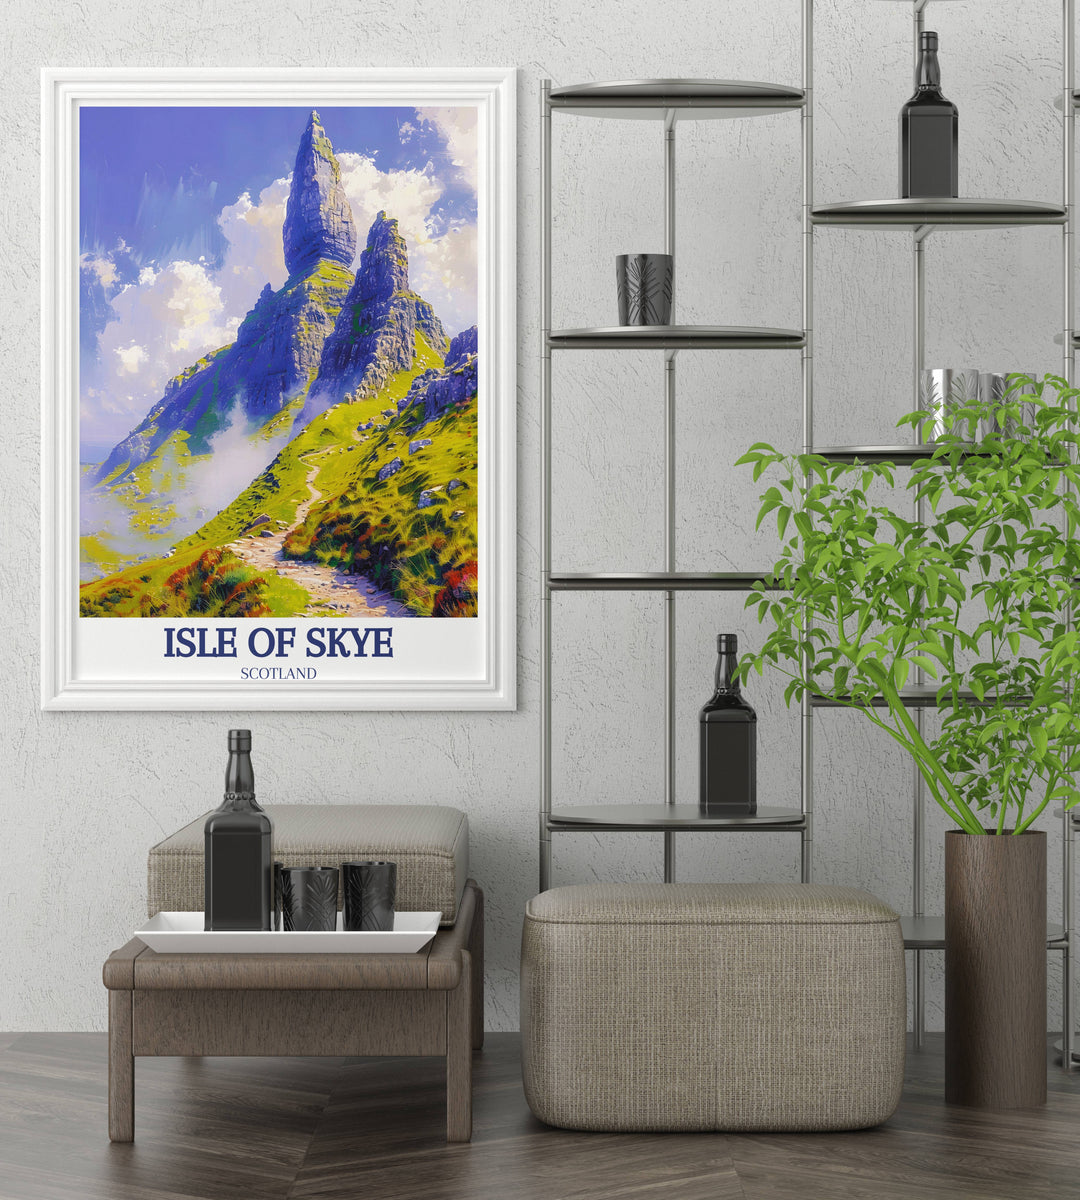 A detailed Isle of Skye poster focusing on the rugged terrain of The Storr, perfect for adventurers and explorers looking to bring a sense of the great outdoors into their home.